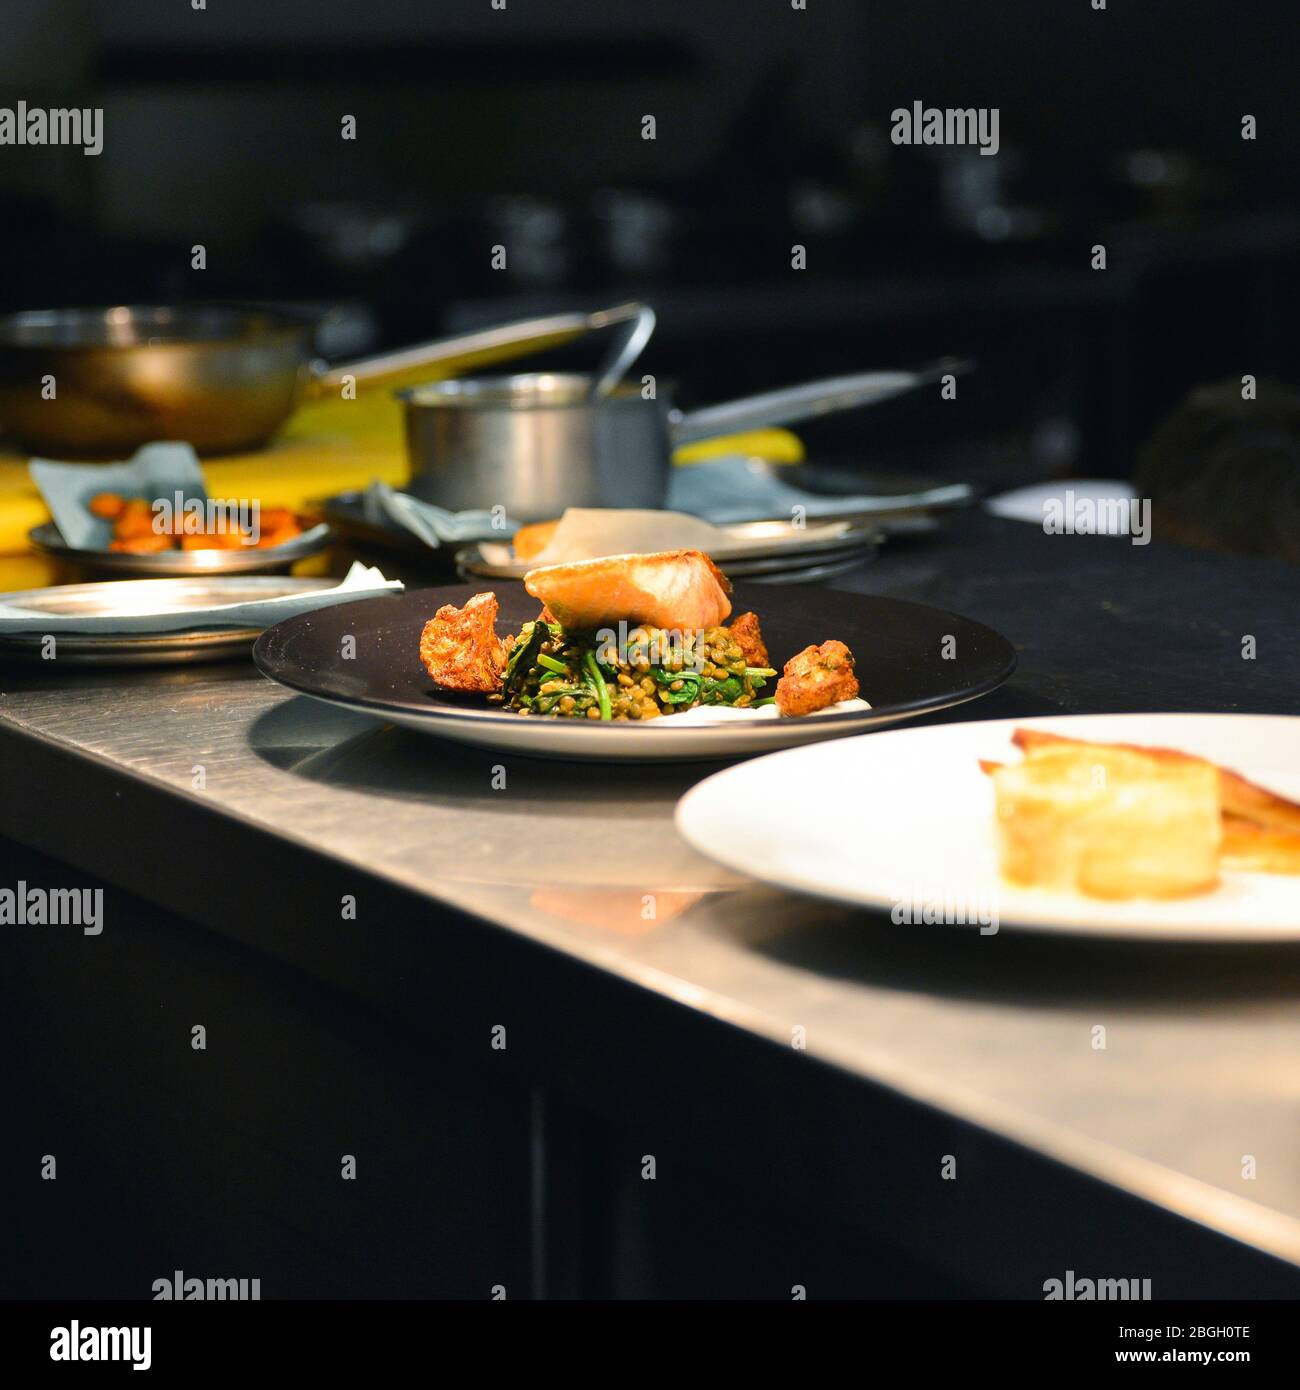 Plated Food waiting for Service in Restaurant Kitchen, Stock Photo